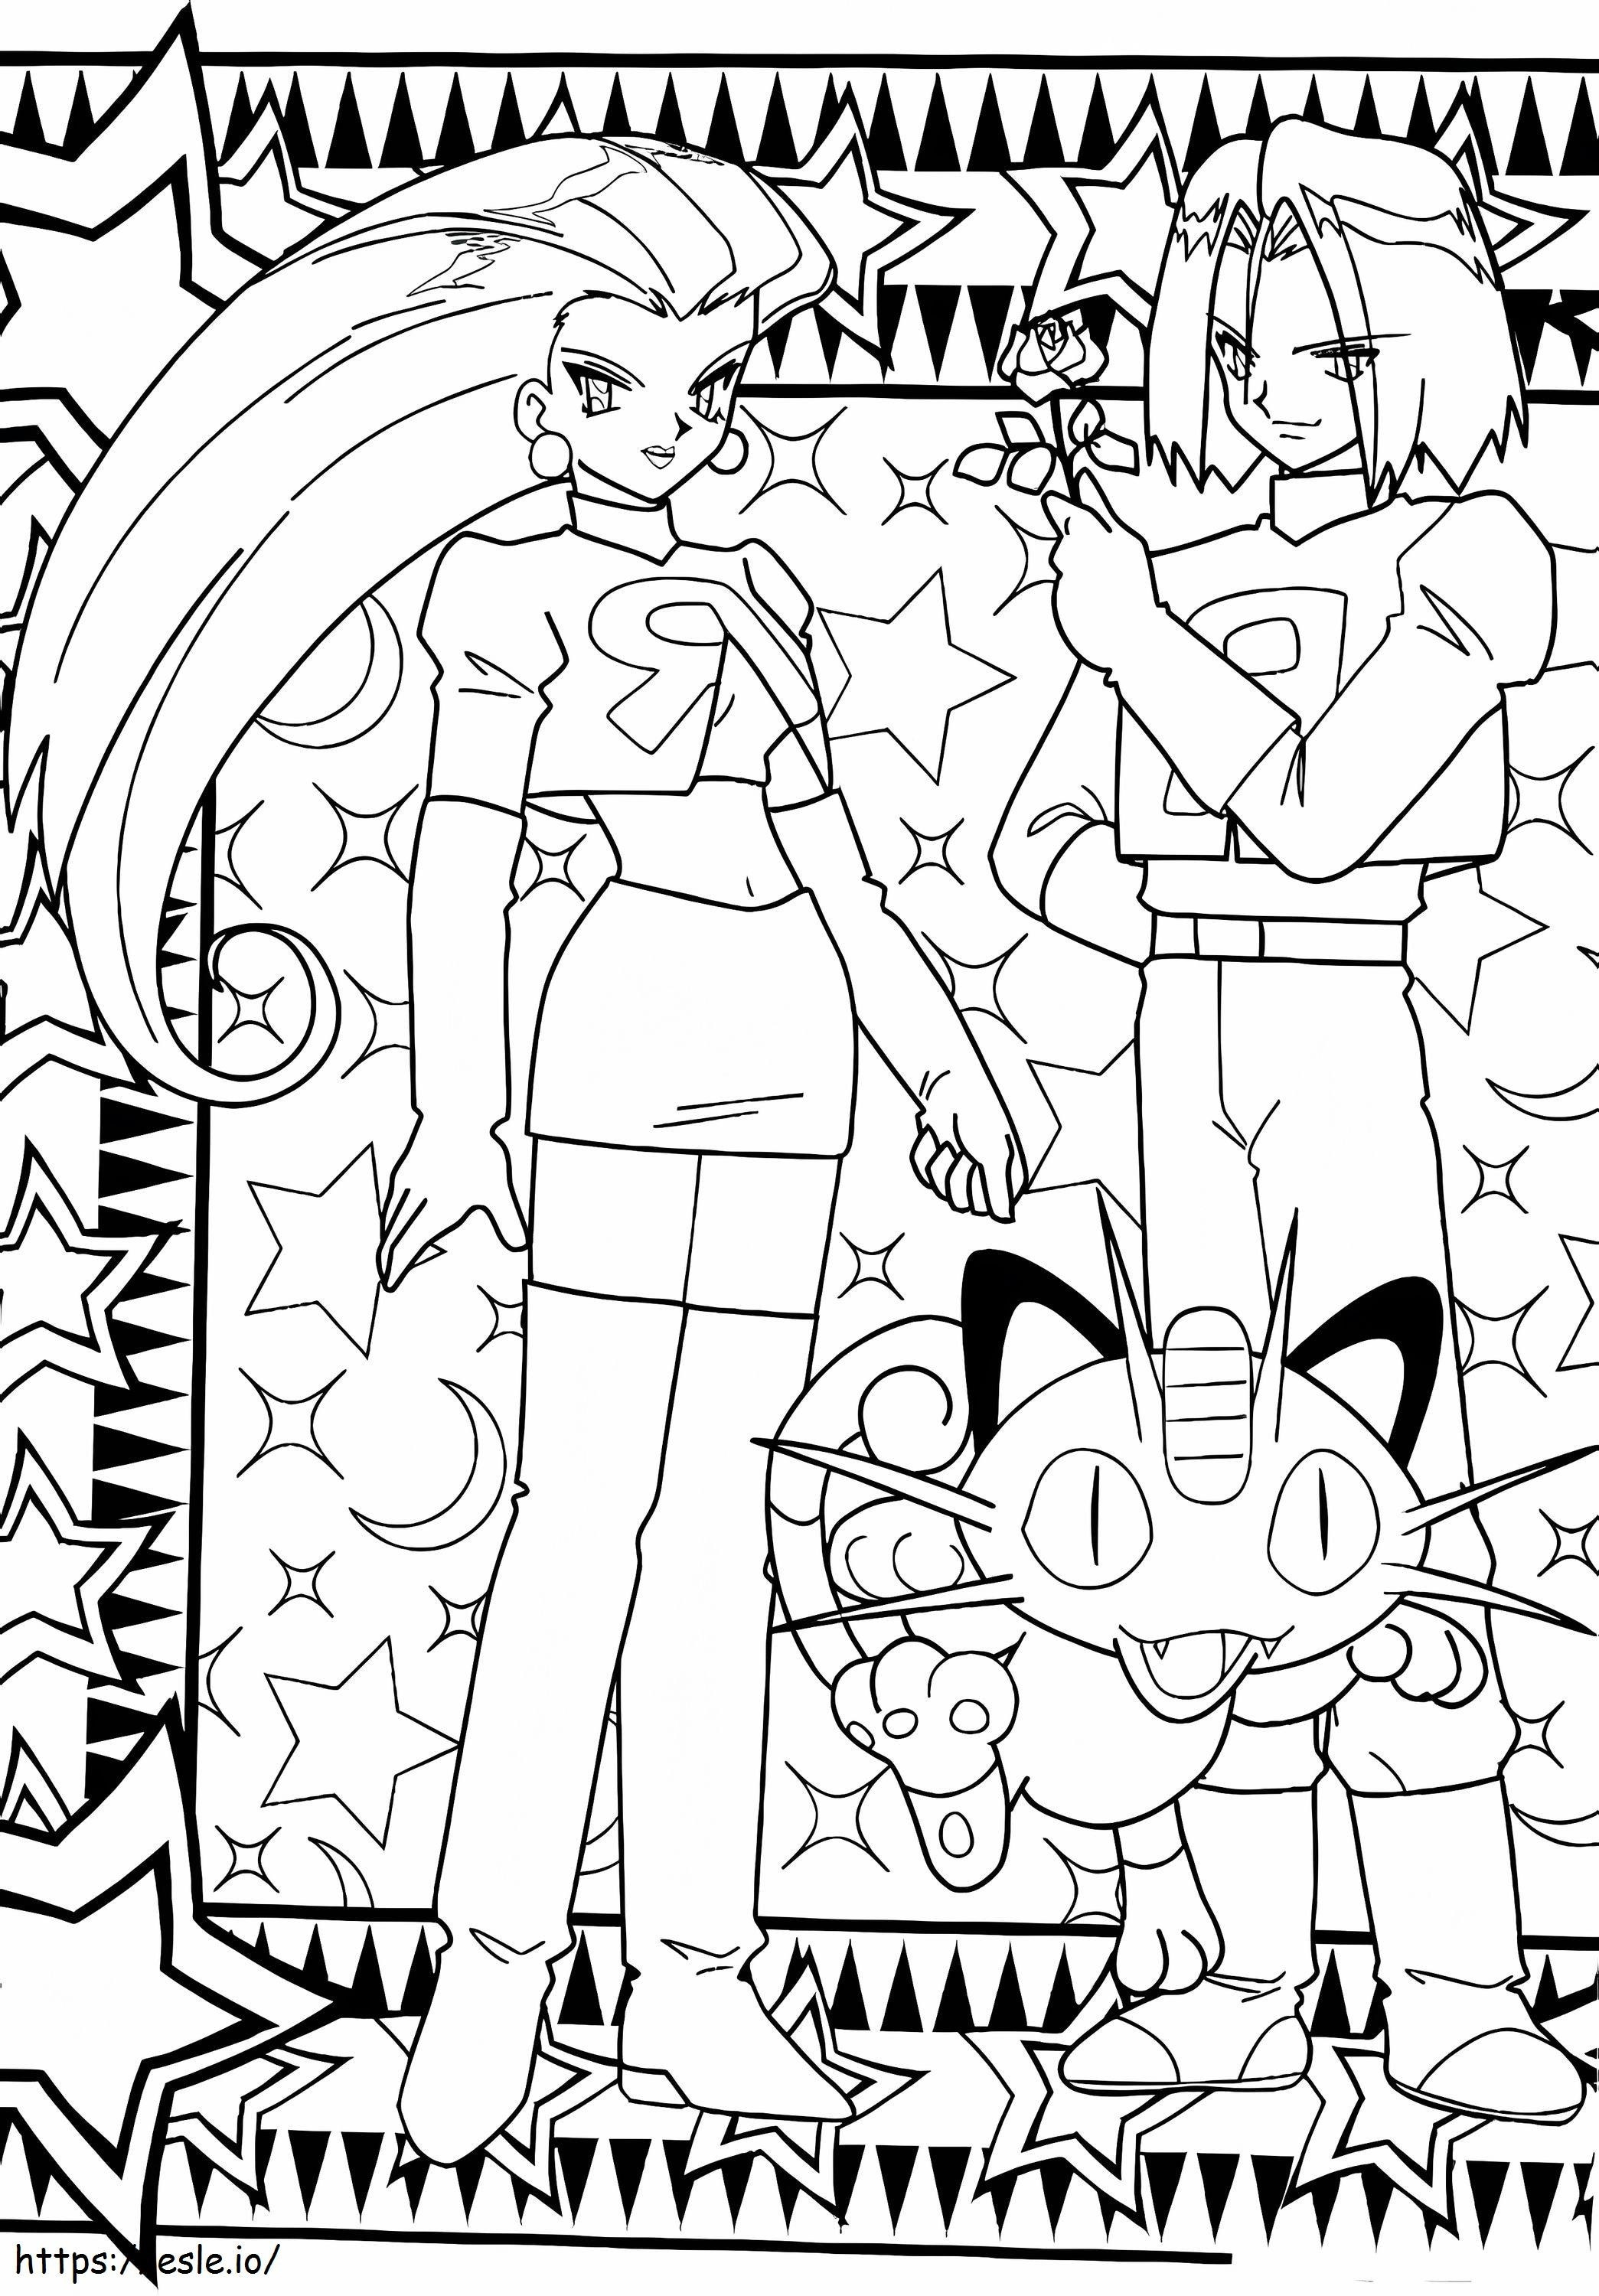 Awesome Team Rocket coloring page